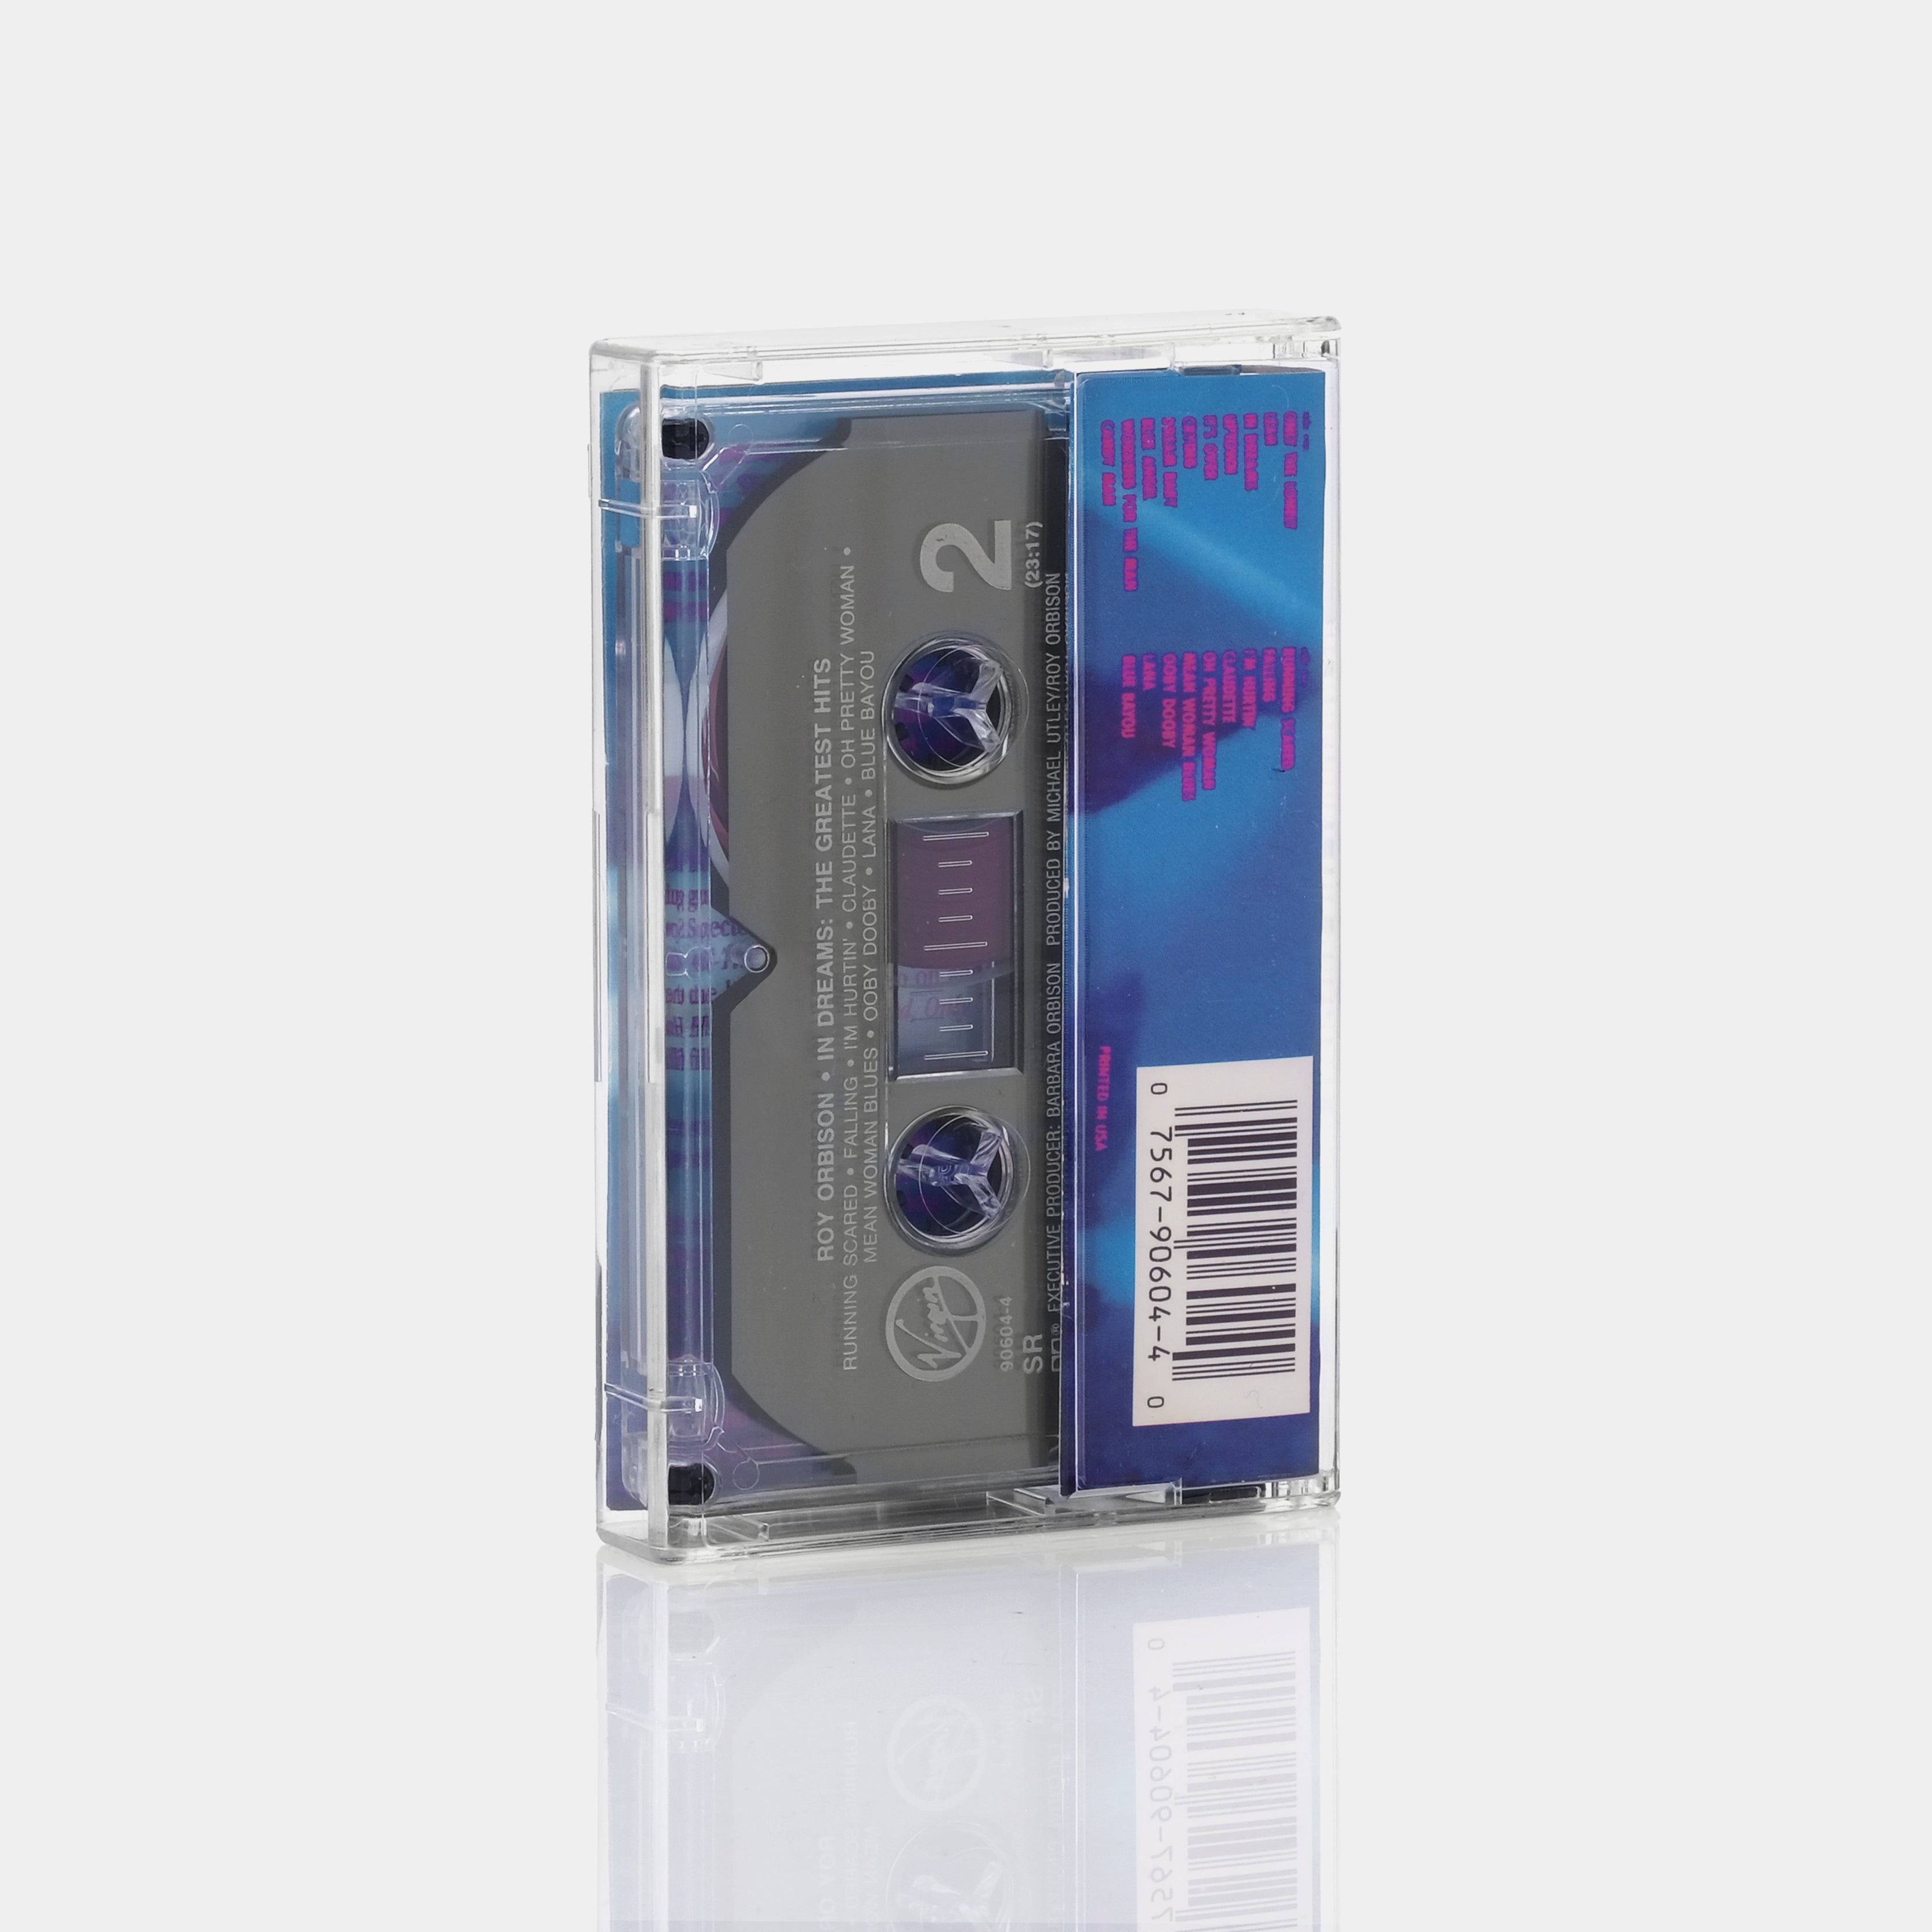 Roy Orbison - In Dreams: The Greatest Hits Cassette Tape